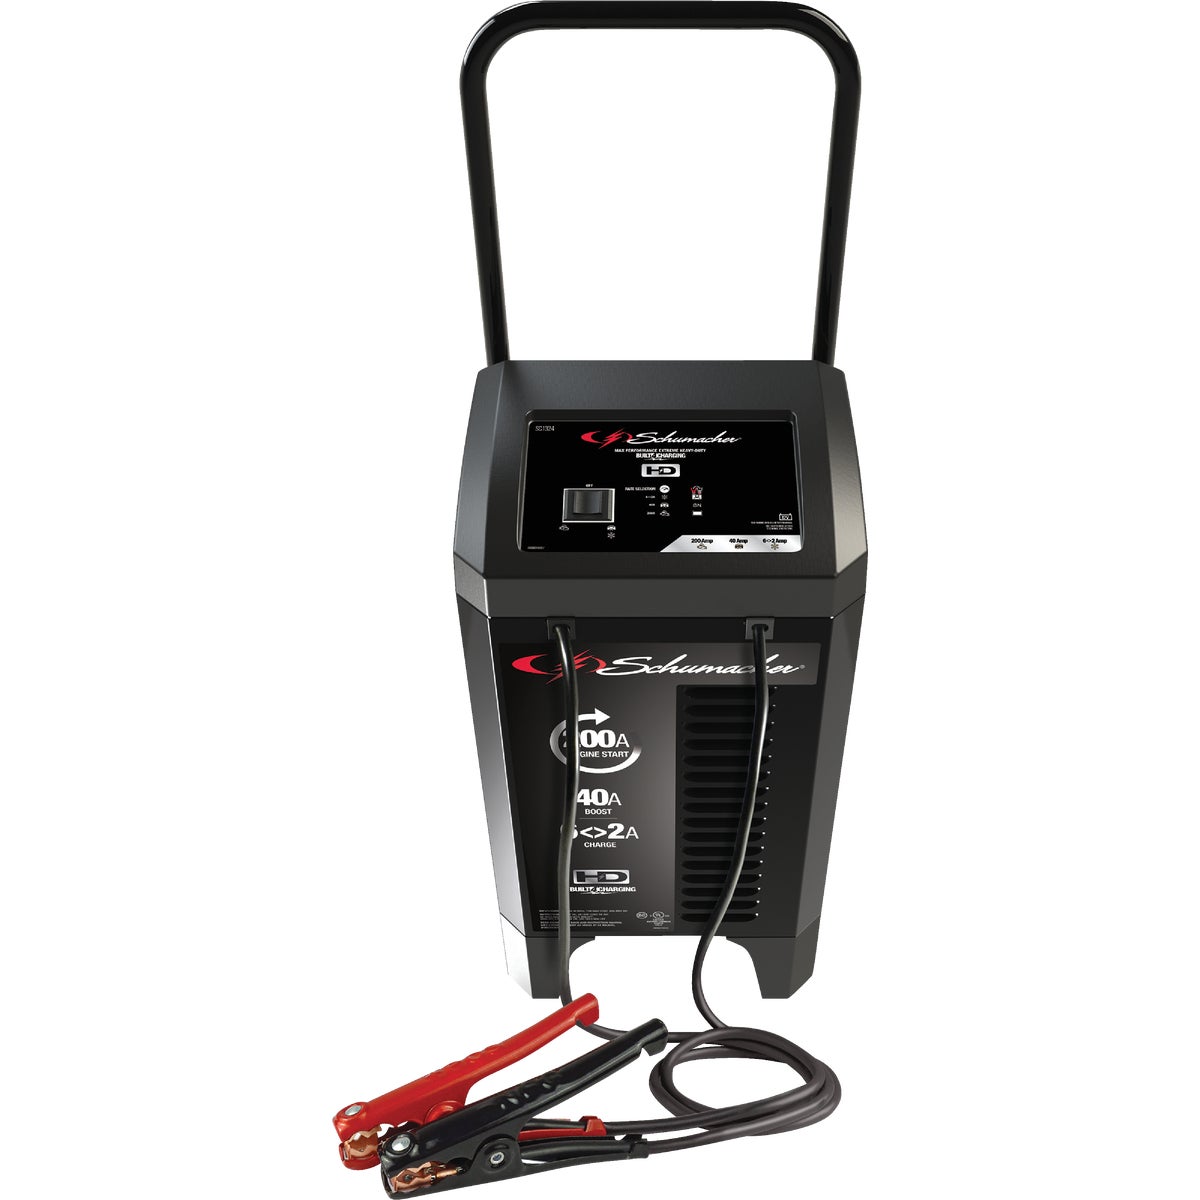 Item 577162, Wheeled charger for 12V batteries provide roll-around convenience and 